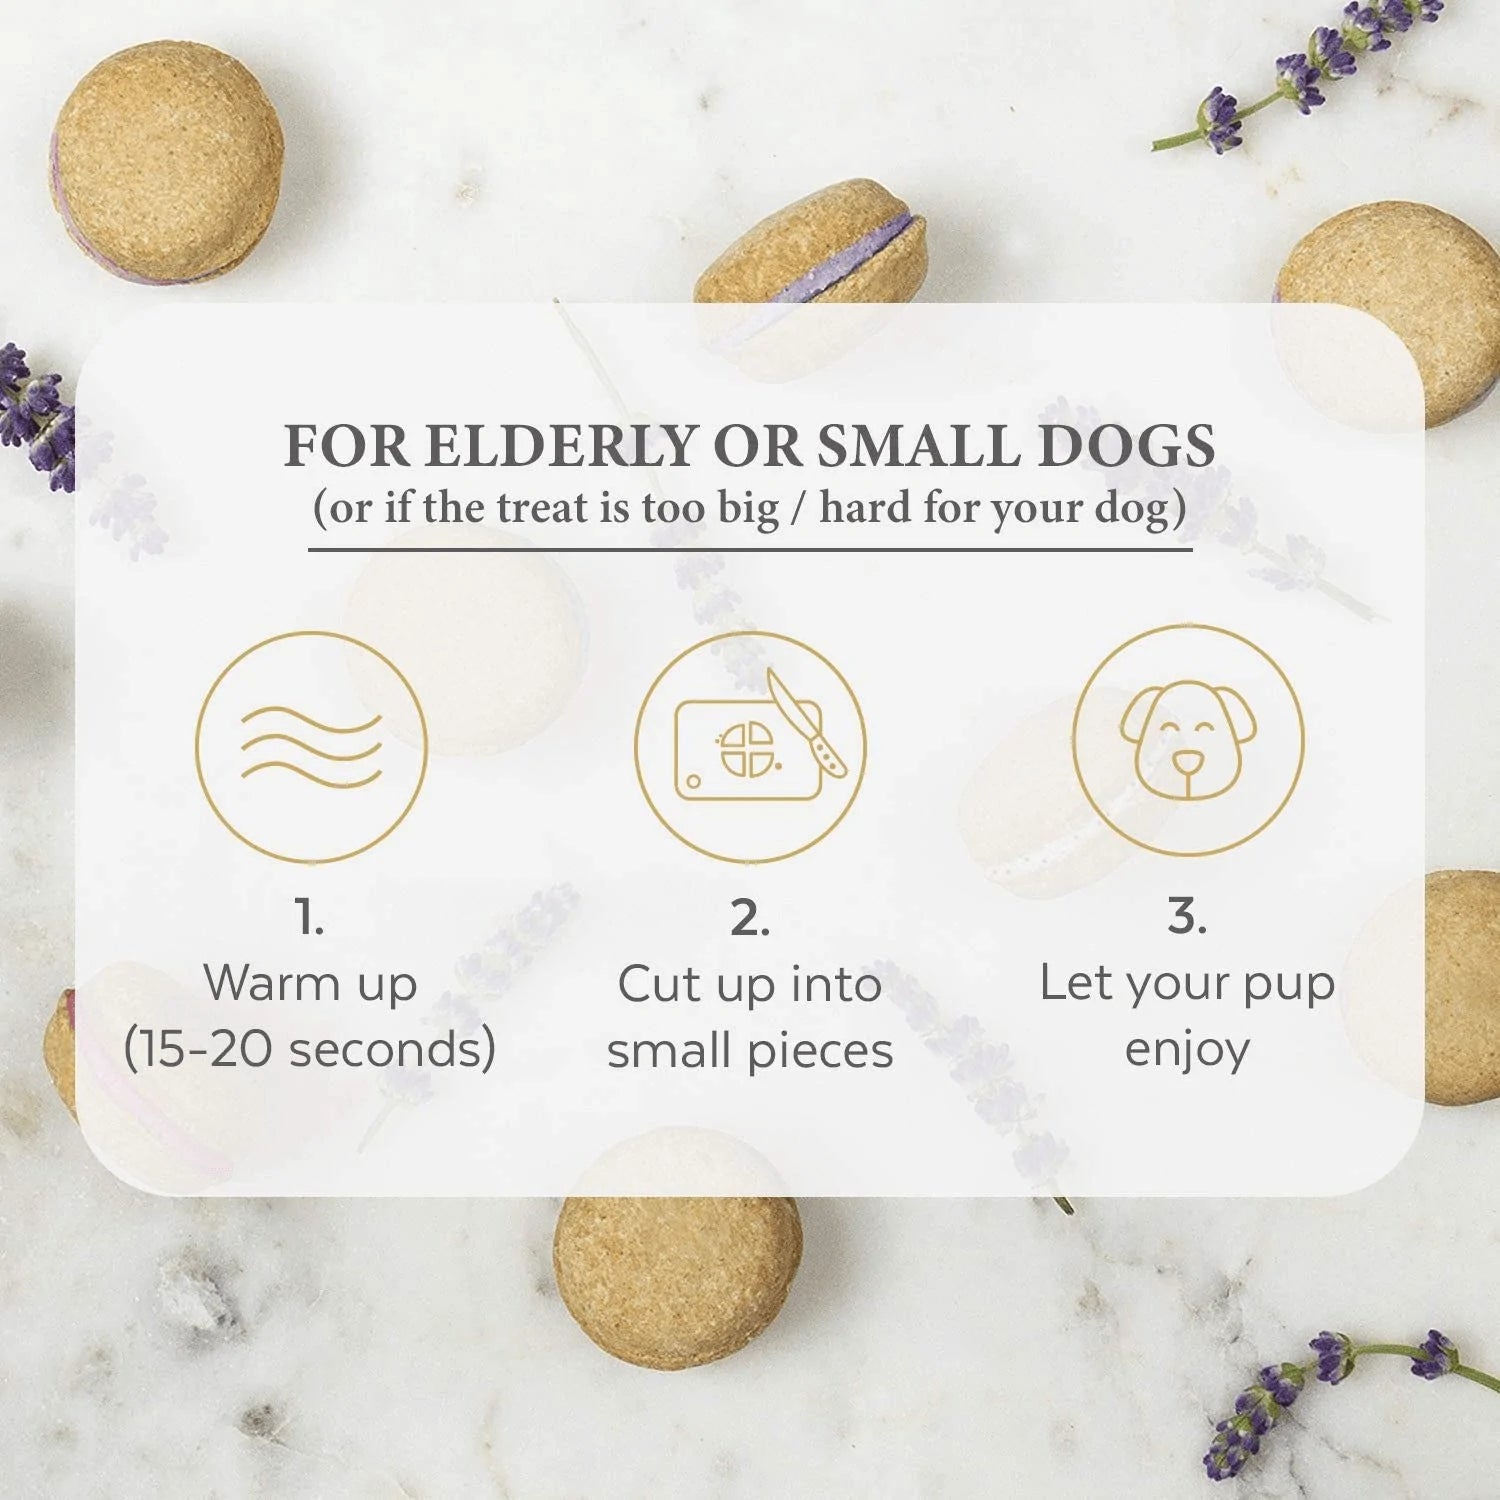 Bonne Et Filou Dog Treats Dog Macarons Luxury Handmade Dog Gifts Dog Birthday Healthy and Delicious Gourmet Dog Snack with All-Natural Ingredients Animals & Pet Supplies > Pet Supplies > Dog Supplies > Dog Treats Bonne et Filou   